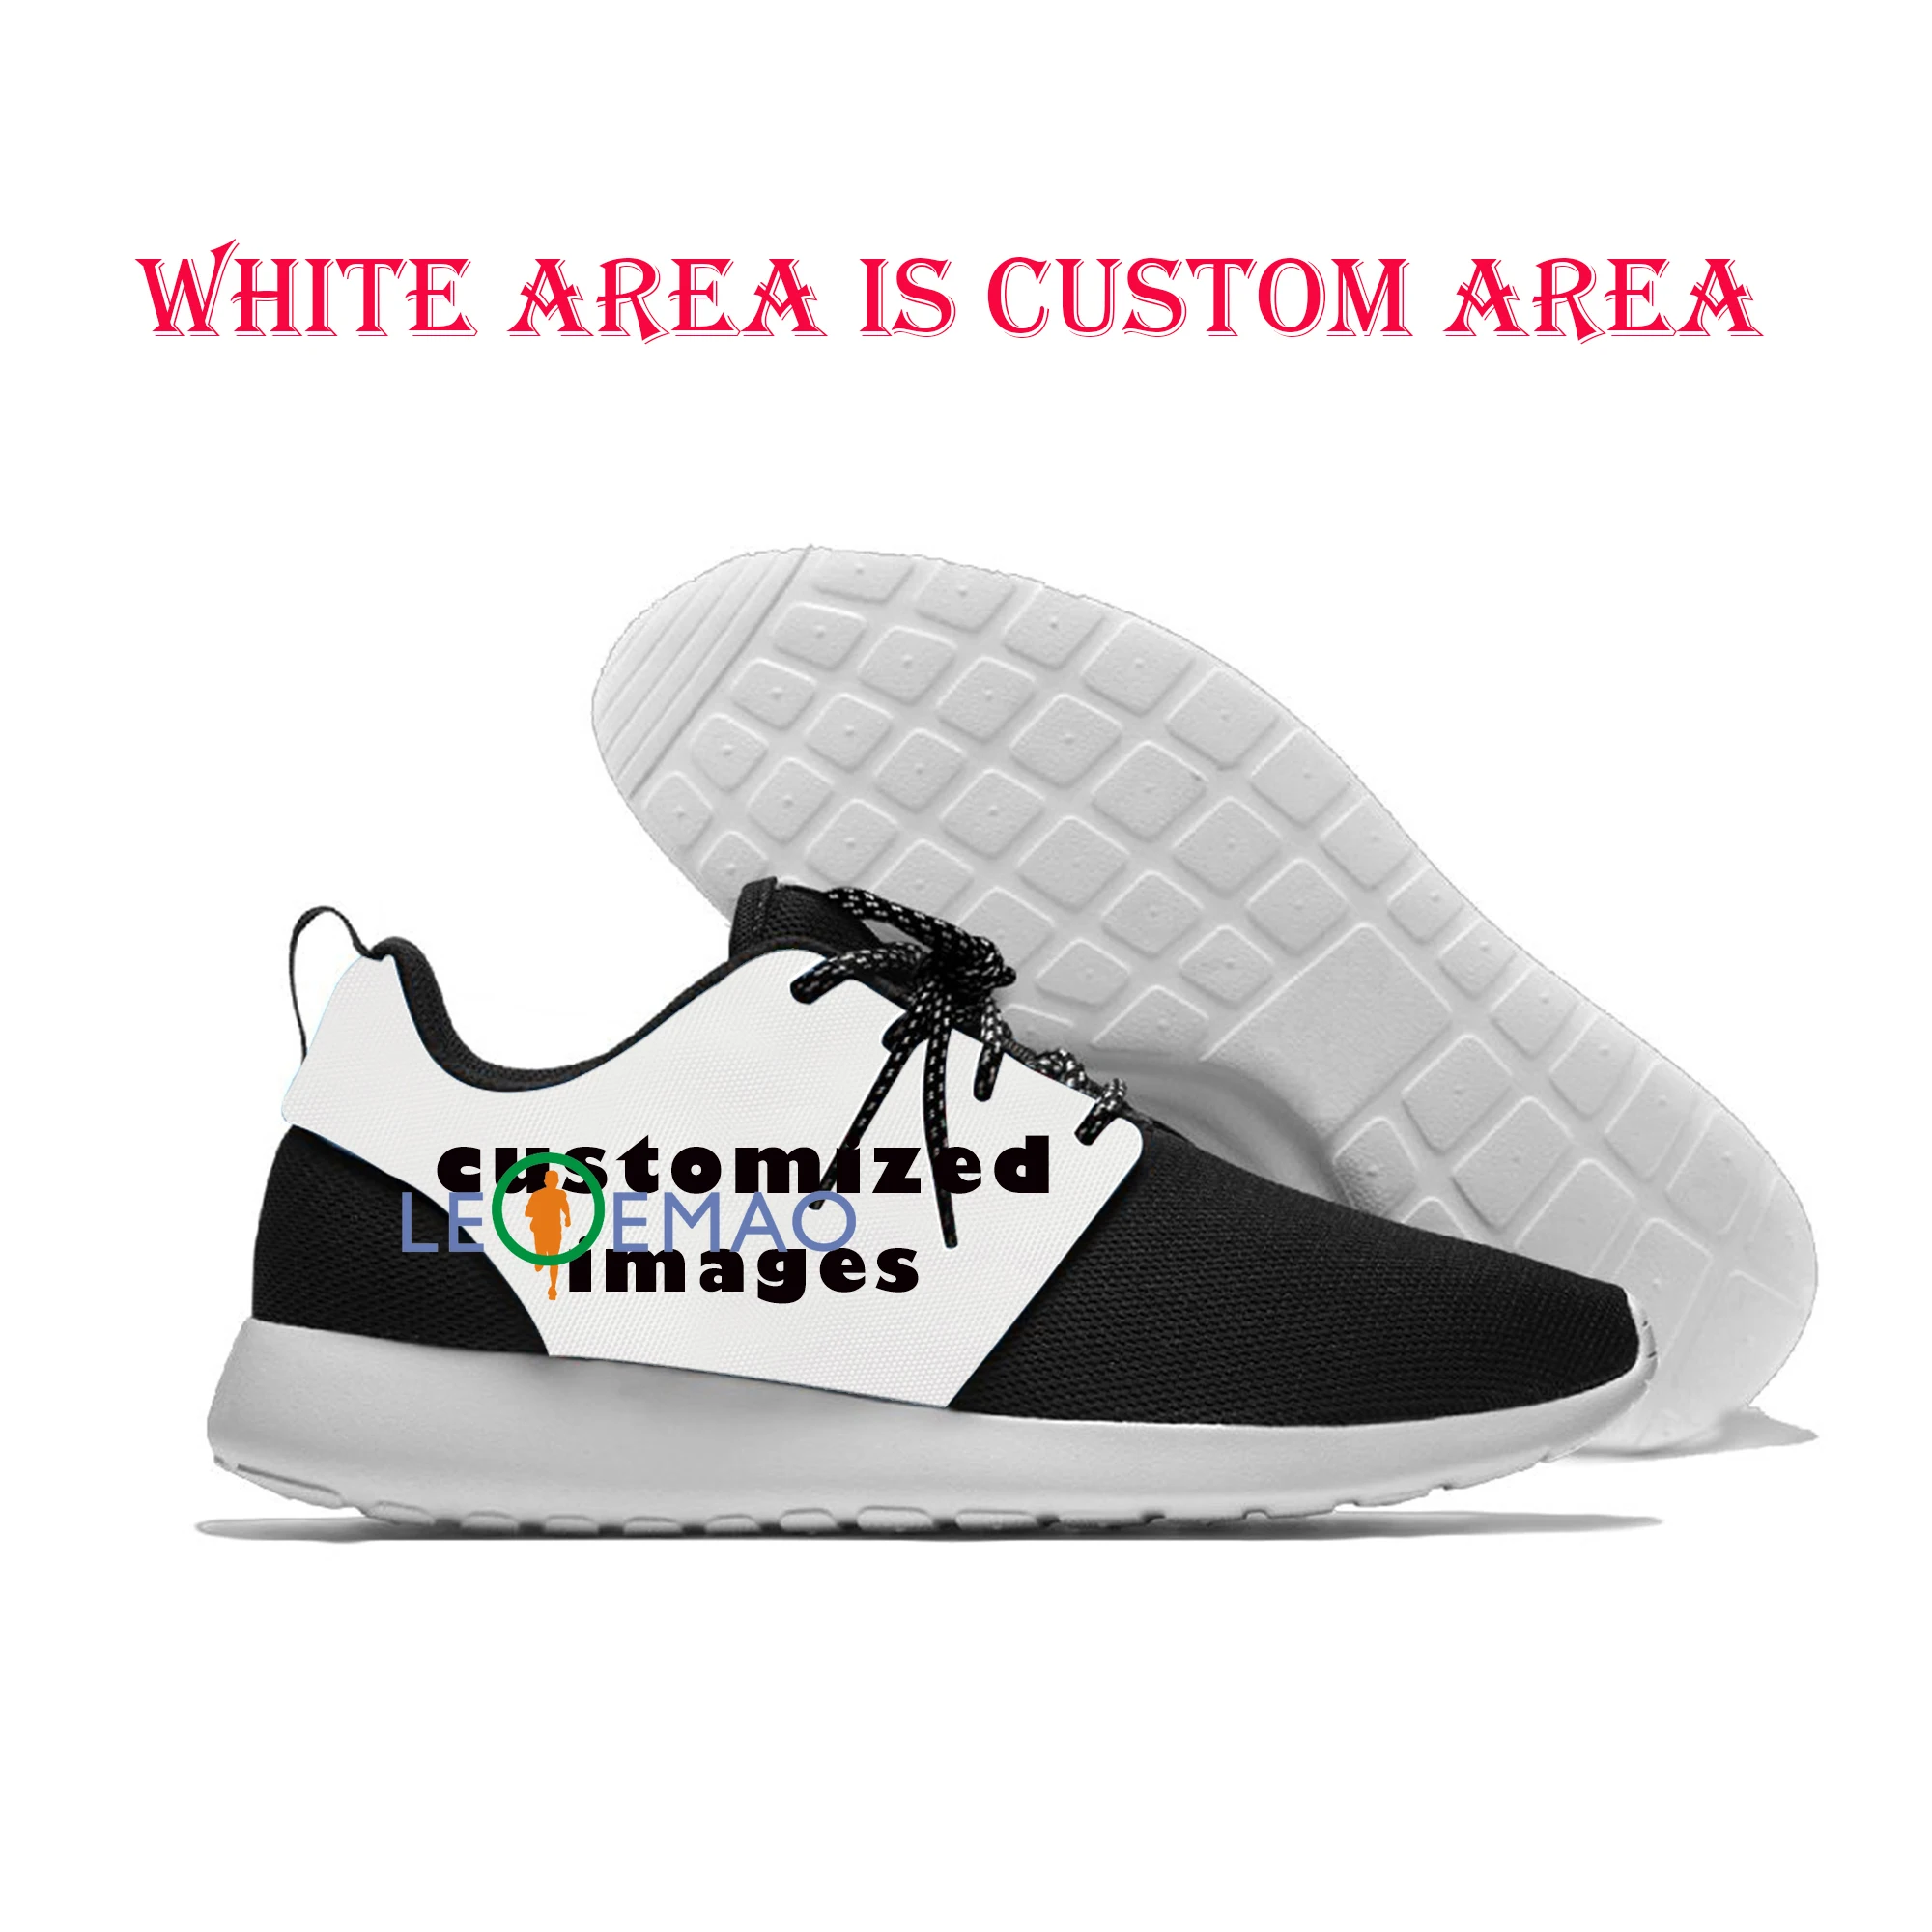 

Free Running Fantasy Animal Unicorn Western Myth and Legends Vogue Shoes Boy's Girl's Bright Blues Athietic Breathable Sneakers